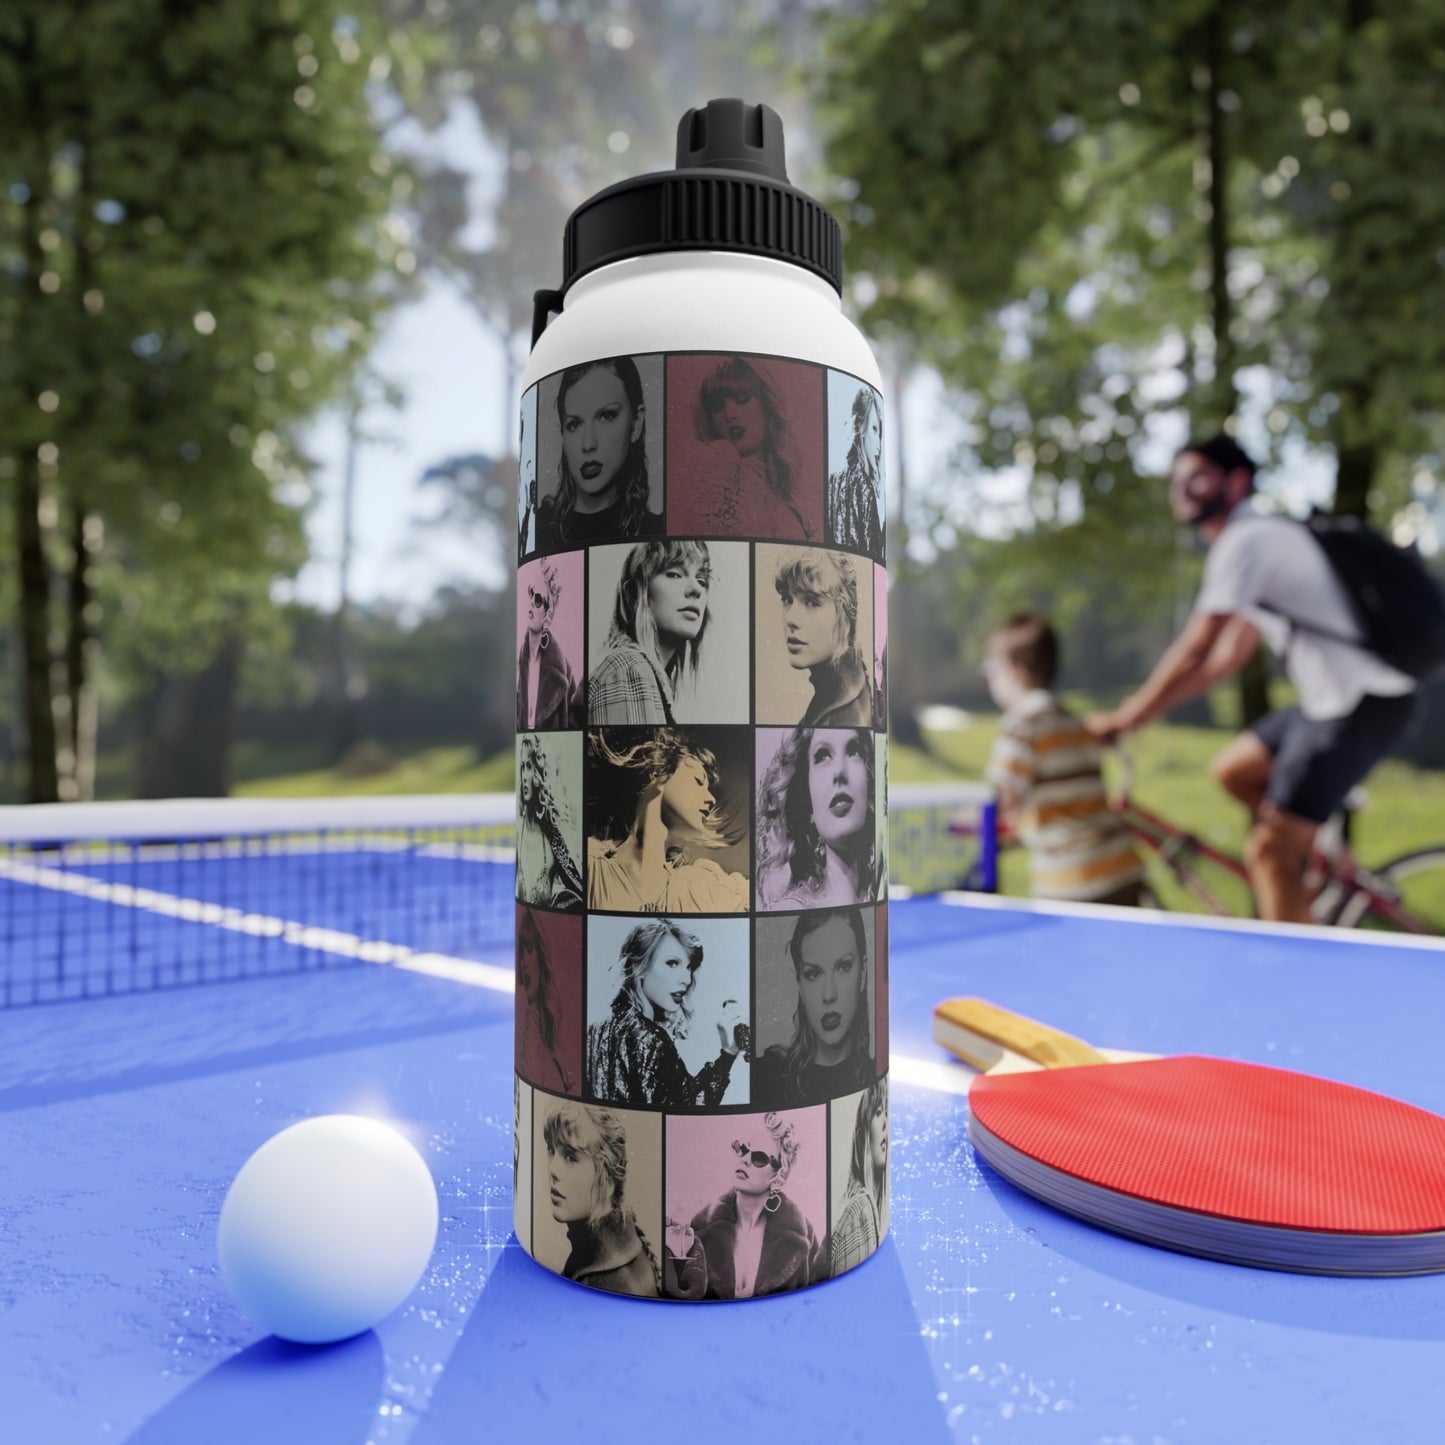 Taylor Swift Eras Collage Stainless Steel Sports Lid Water Bottle